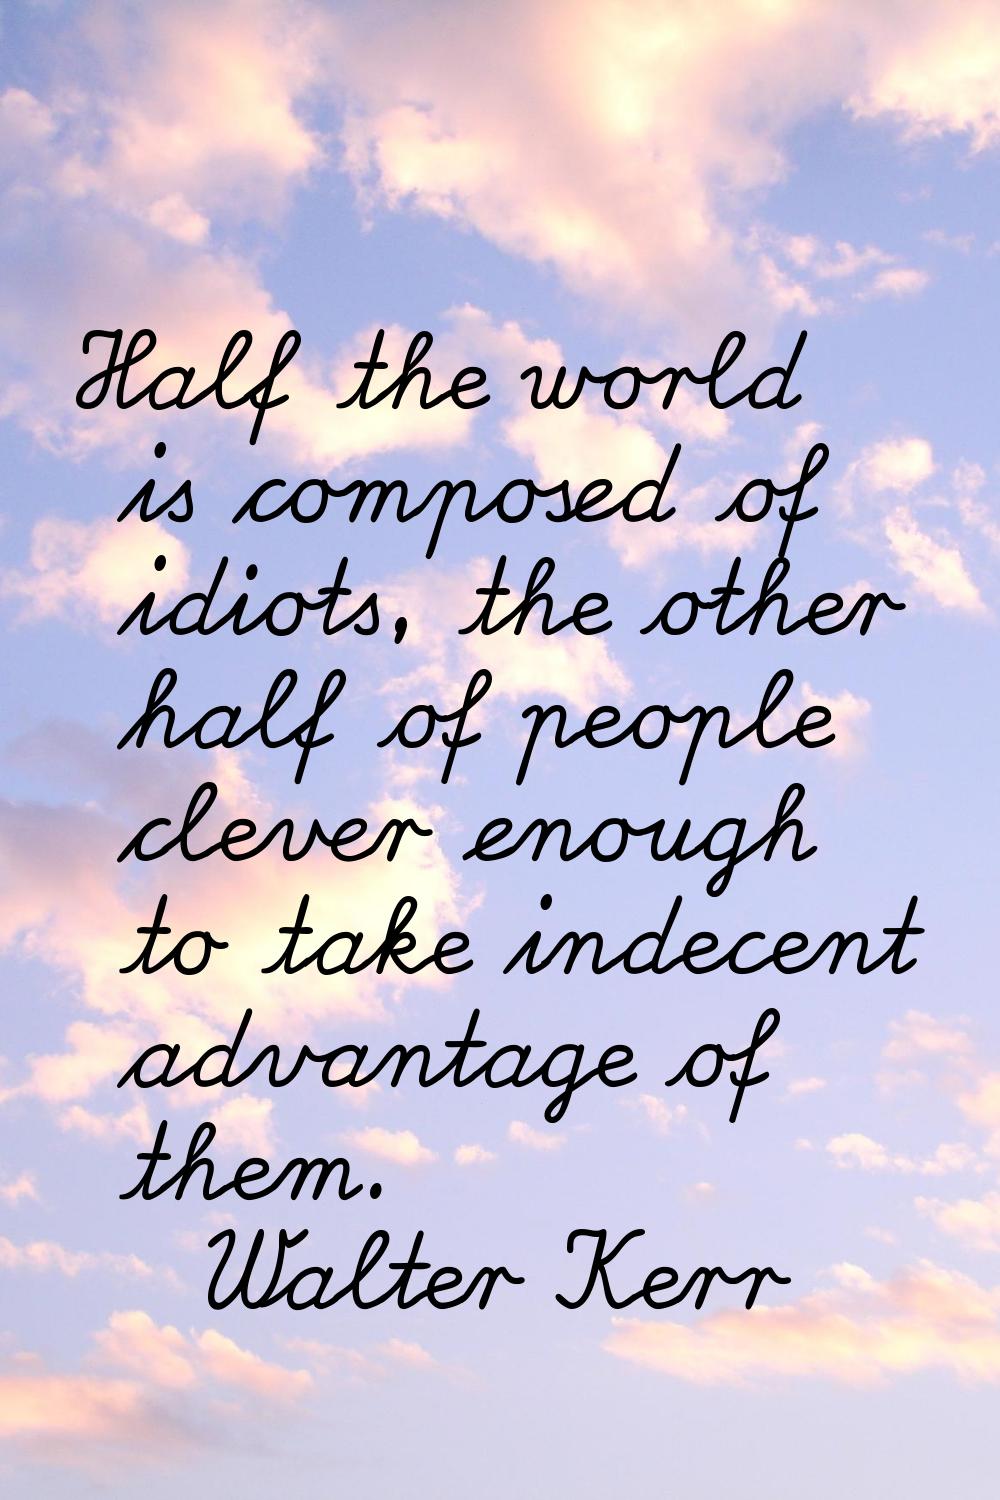 Half the world is composed of idiots, the other half of people clever enough to take indecent advan